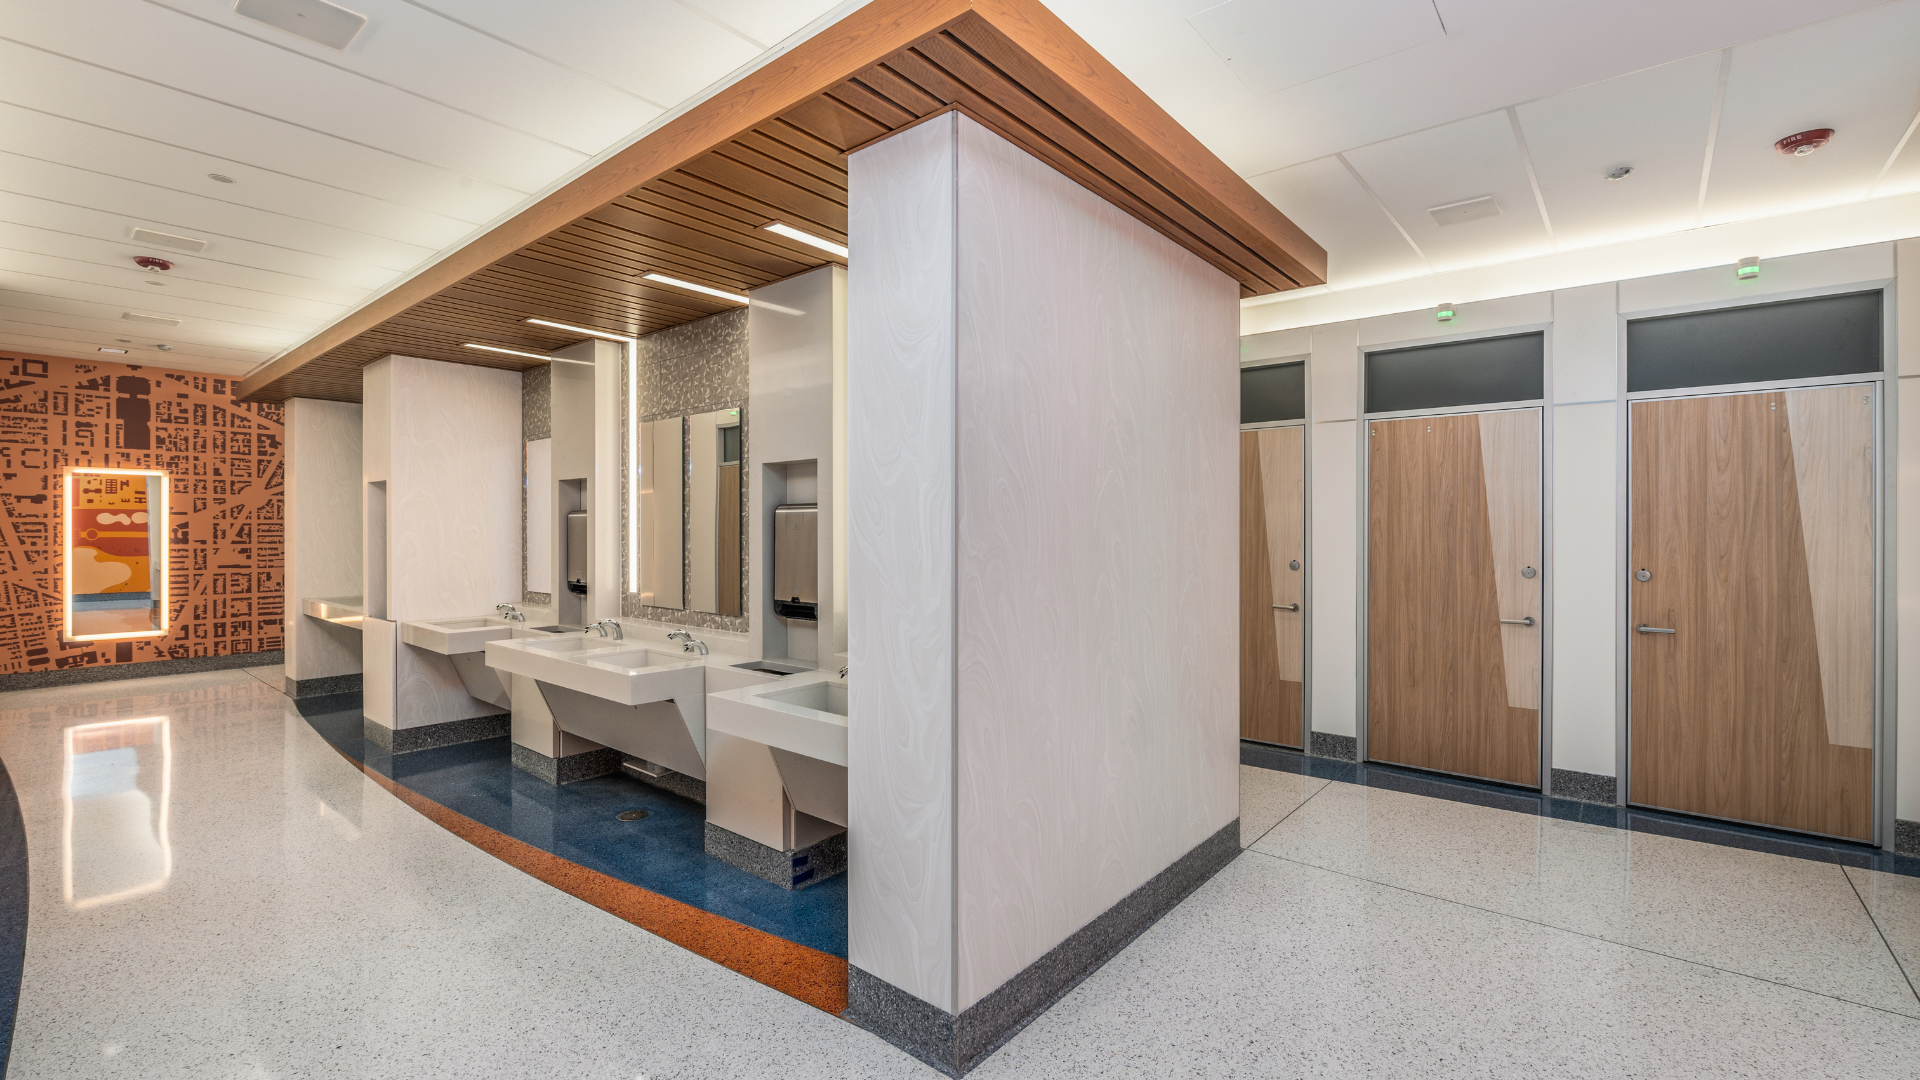 Photograph of the interior of a Concourse A restroom at BWI Marshall Airport